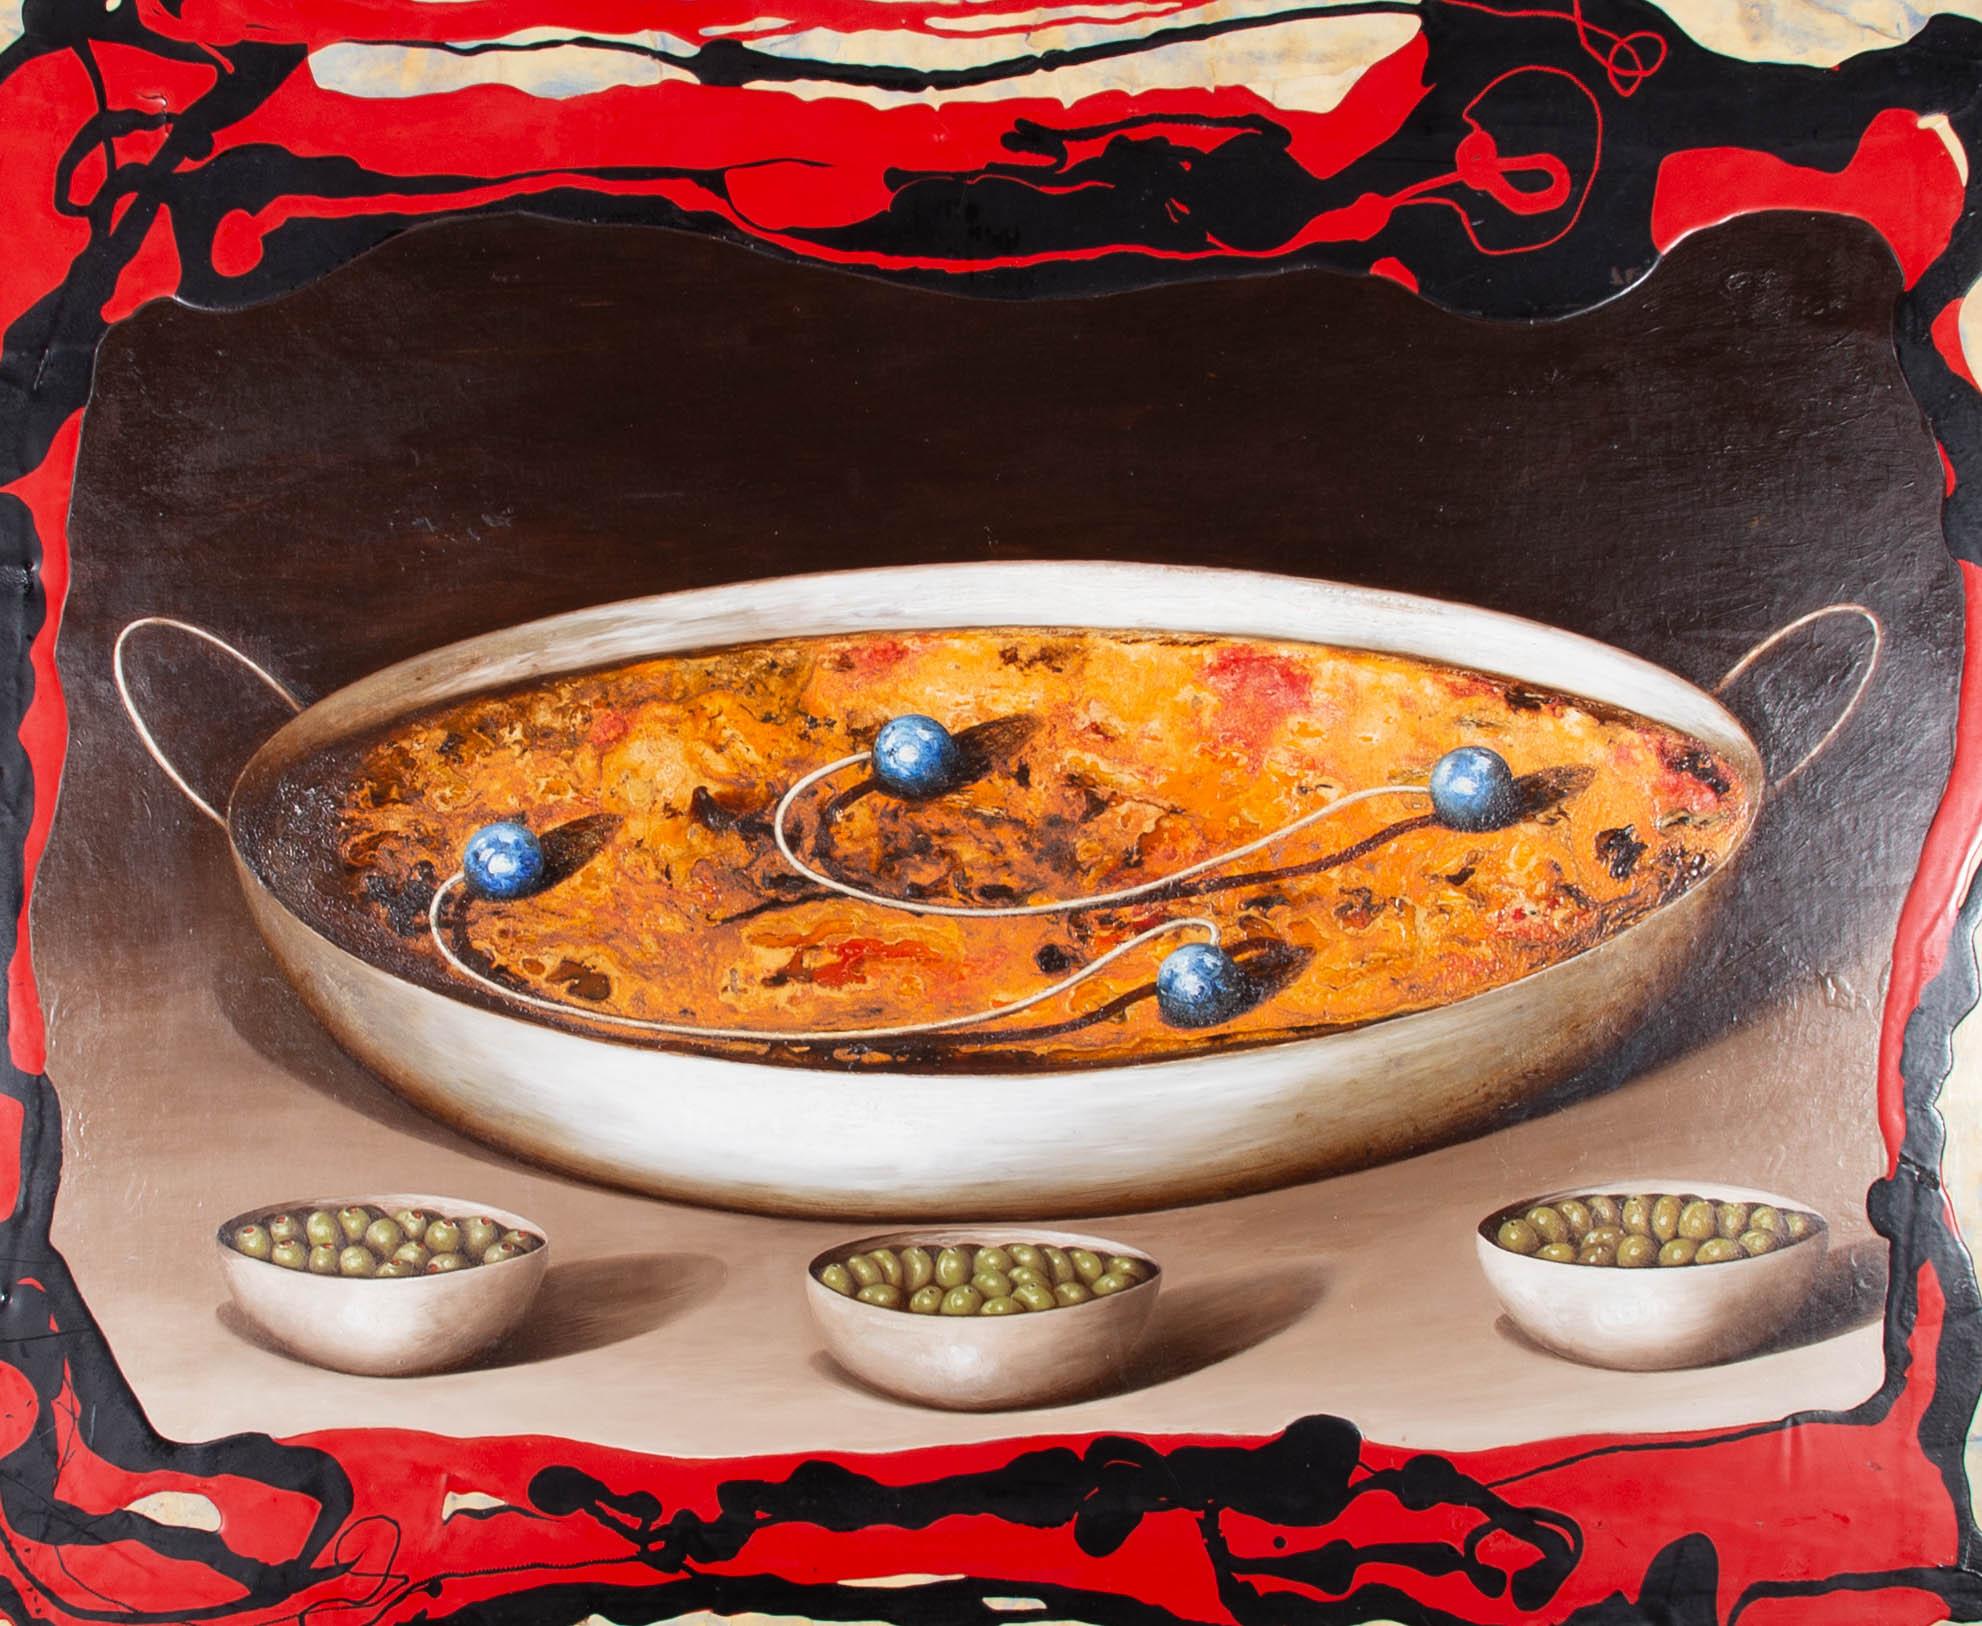 An incredibly striking and vibrant surrealist still life, showing a large pan full of food that resembles paella. Strange objects made of string and blue balls lie on top of the food. In front of the pan are three bowls of olives. The artist shows